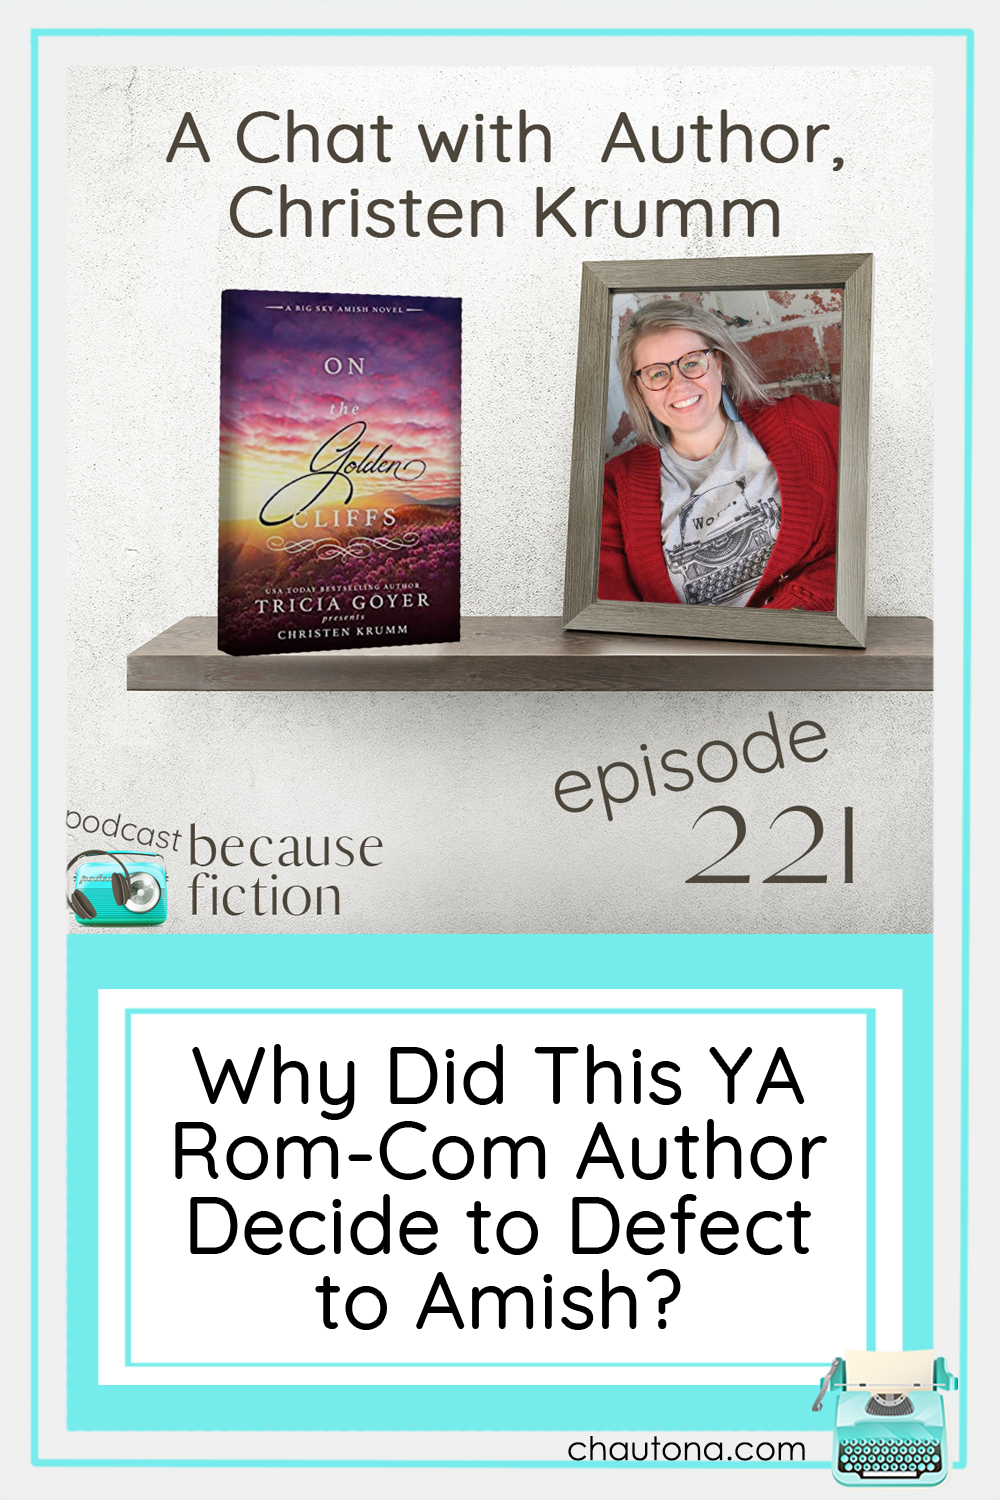 Christen Krumm dove into Amish romance with good advice and excellent writing skills to help her create a book I can't wait to read! via @chautonahavig